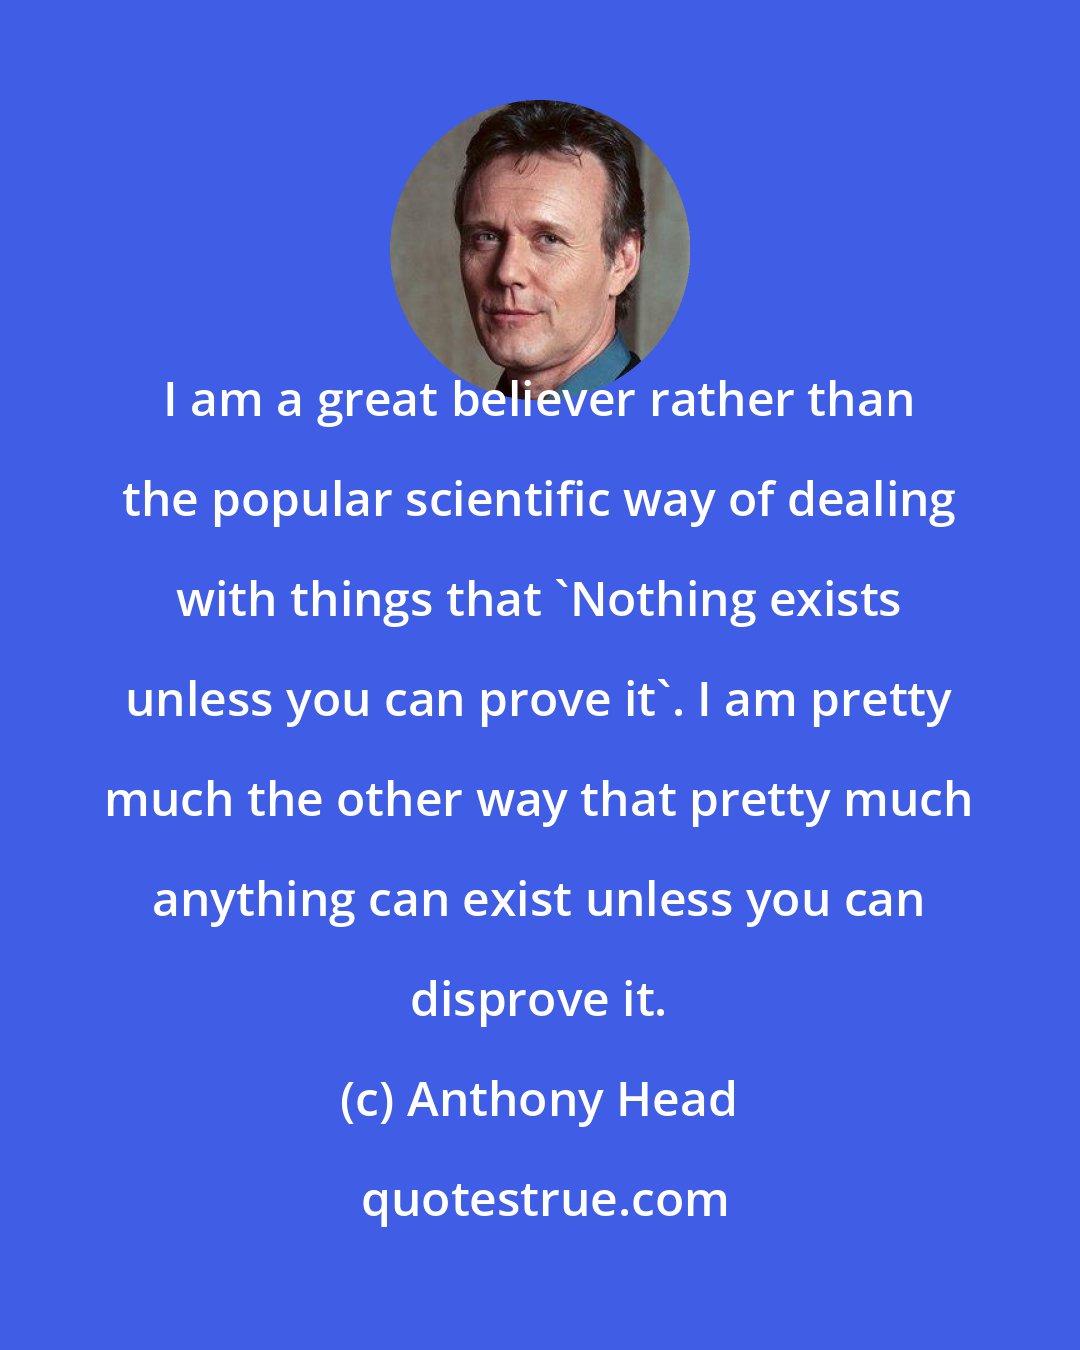 Anthony Head: I am a great believer rather than the popular scientific way of dealing with things that 'Nothing exists unless you can prove it'. I am pretty much the other way that pretty much anything can exist unless you can disprove it.